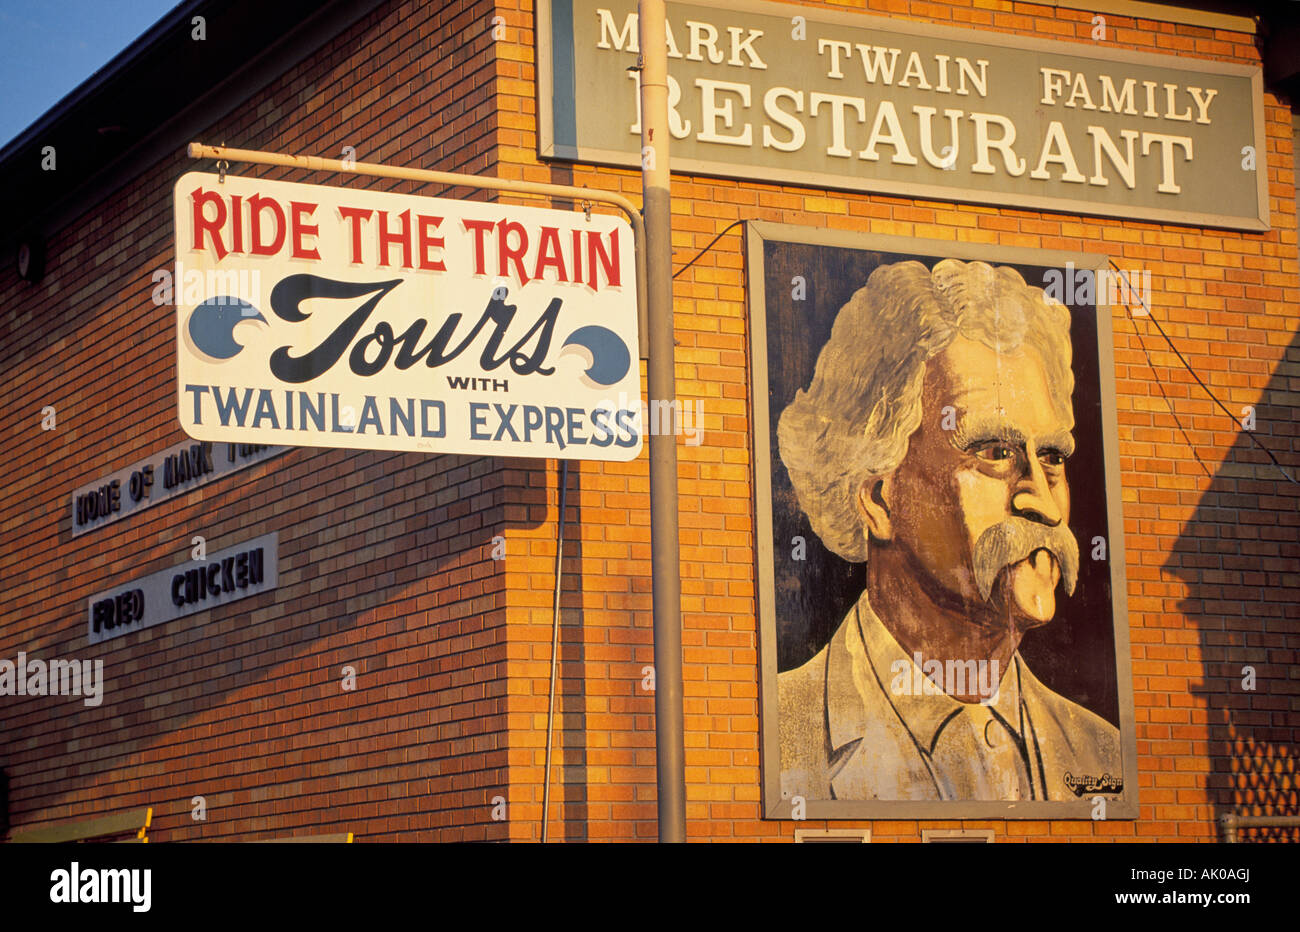 The Mark Twain FAmily Restaurant in the small town of Hannibal home of Mark Twain or Samuel Clemens Stock Photo